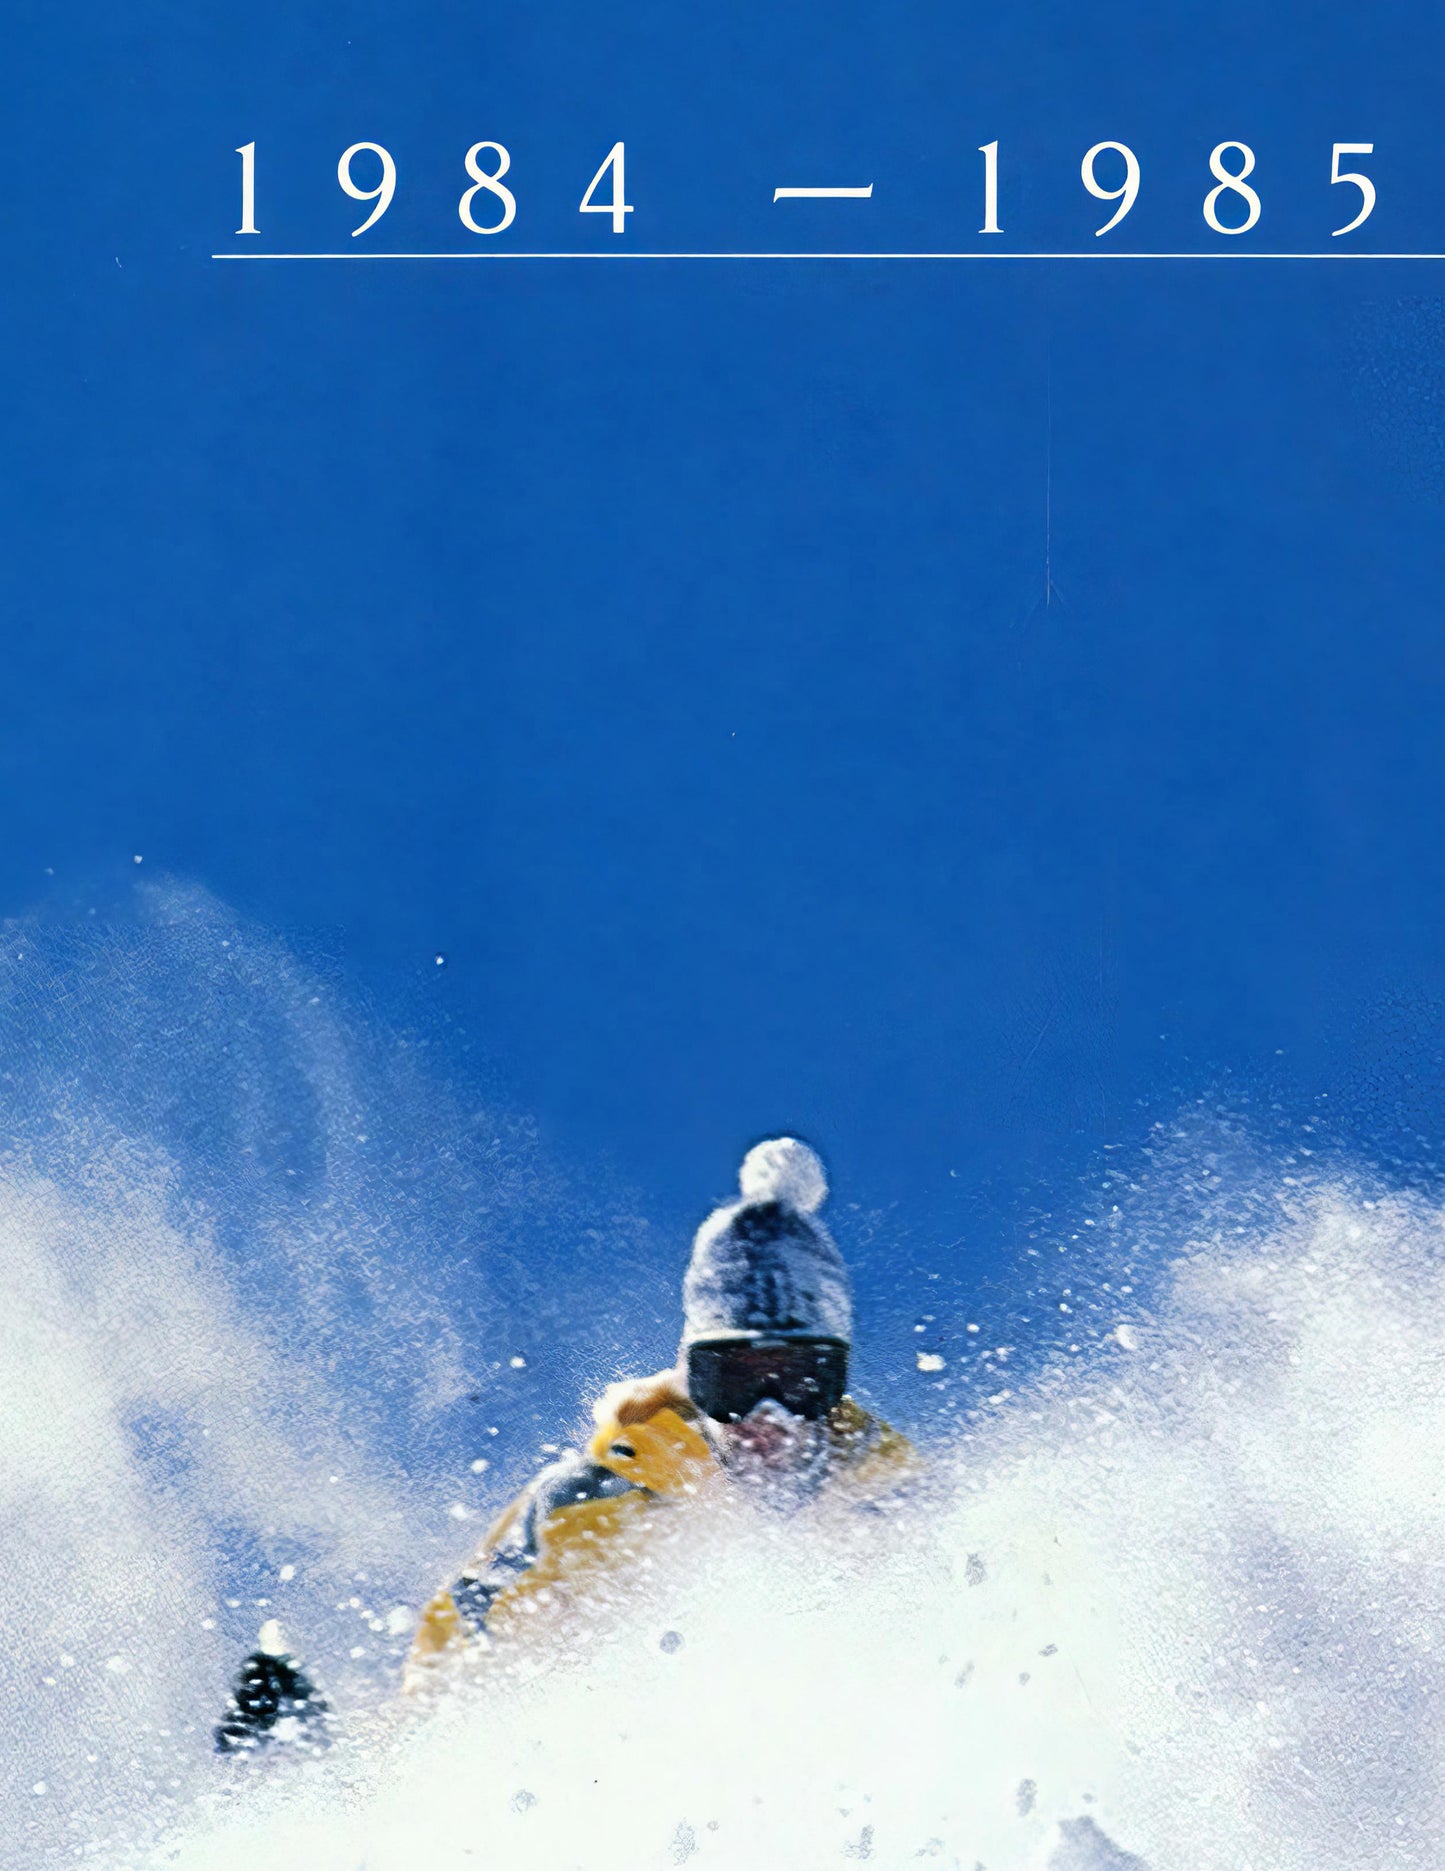 The North Face 1984-1985 Skiwear Magazine Front Cover Poster